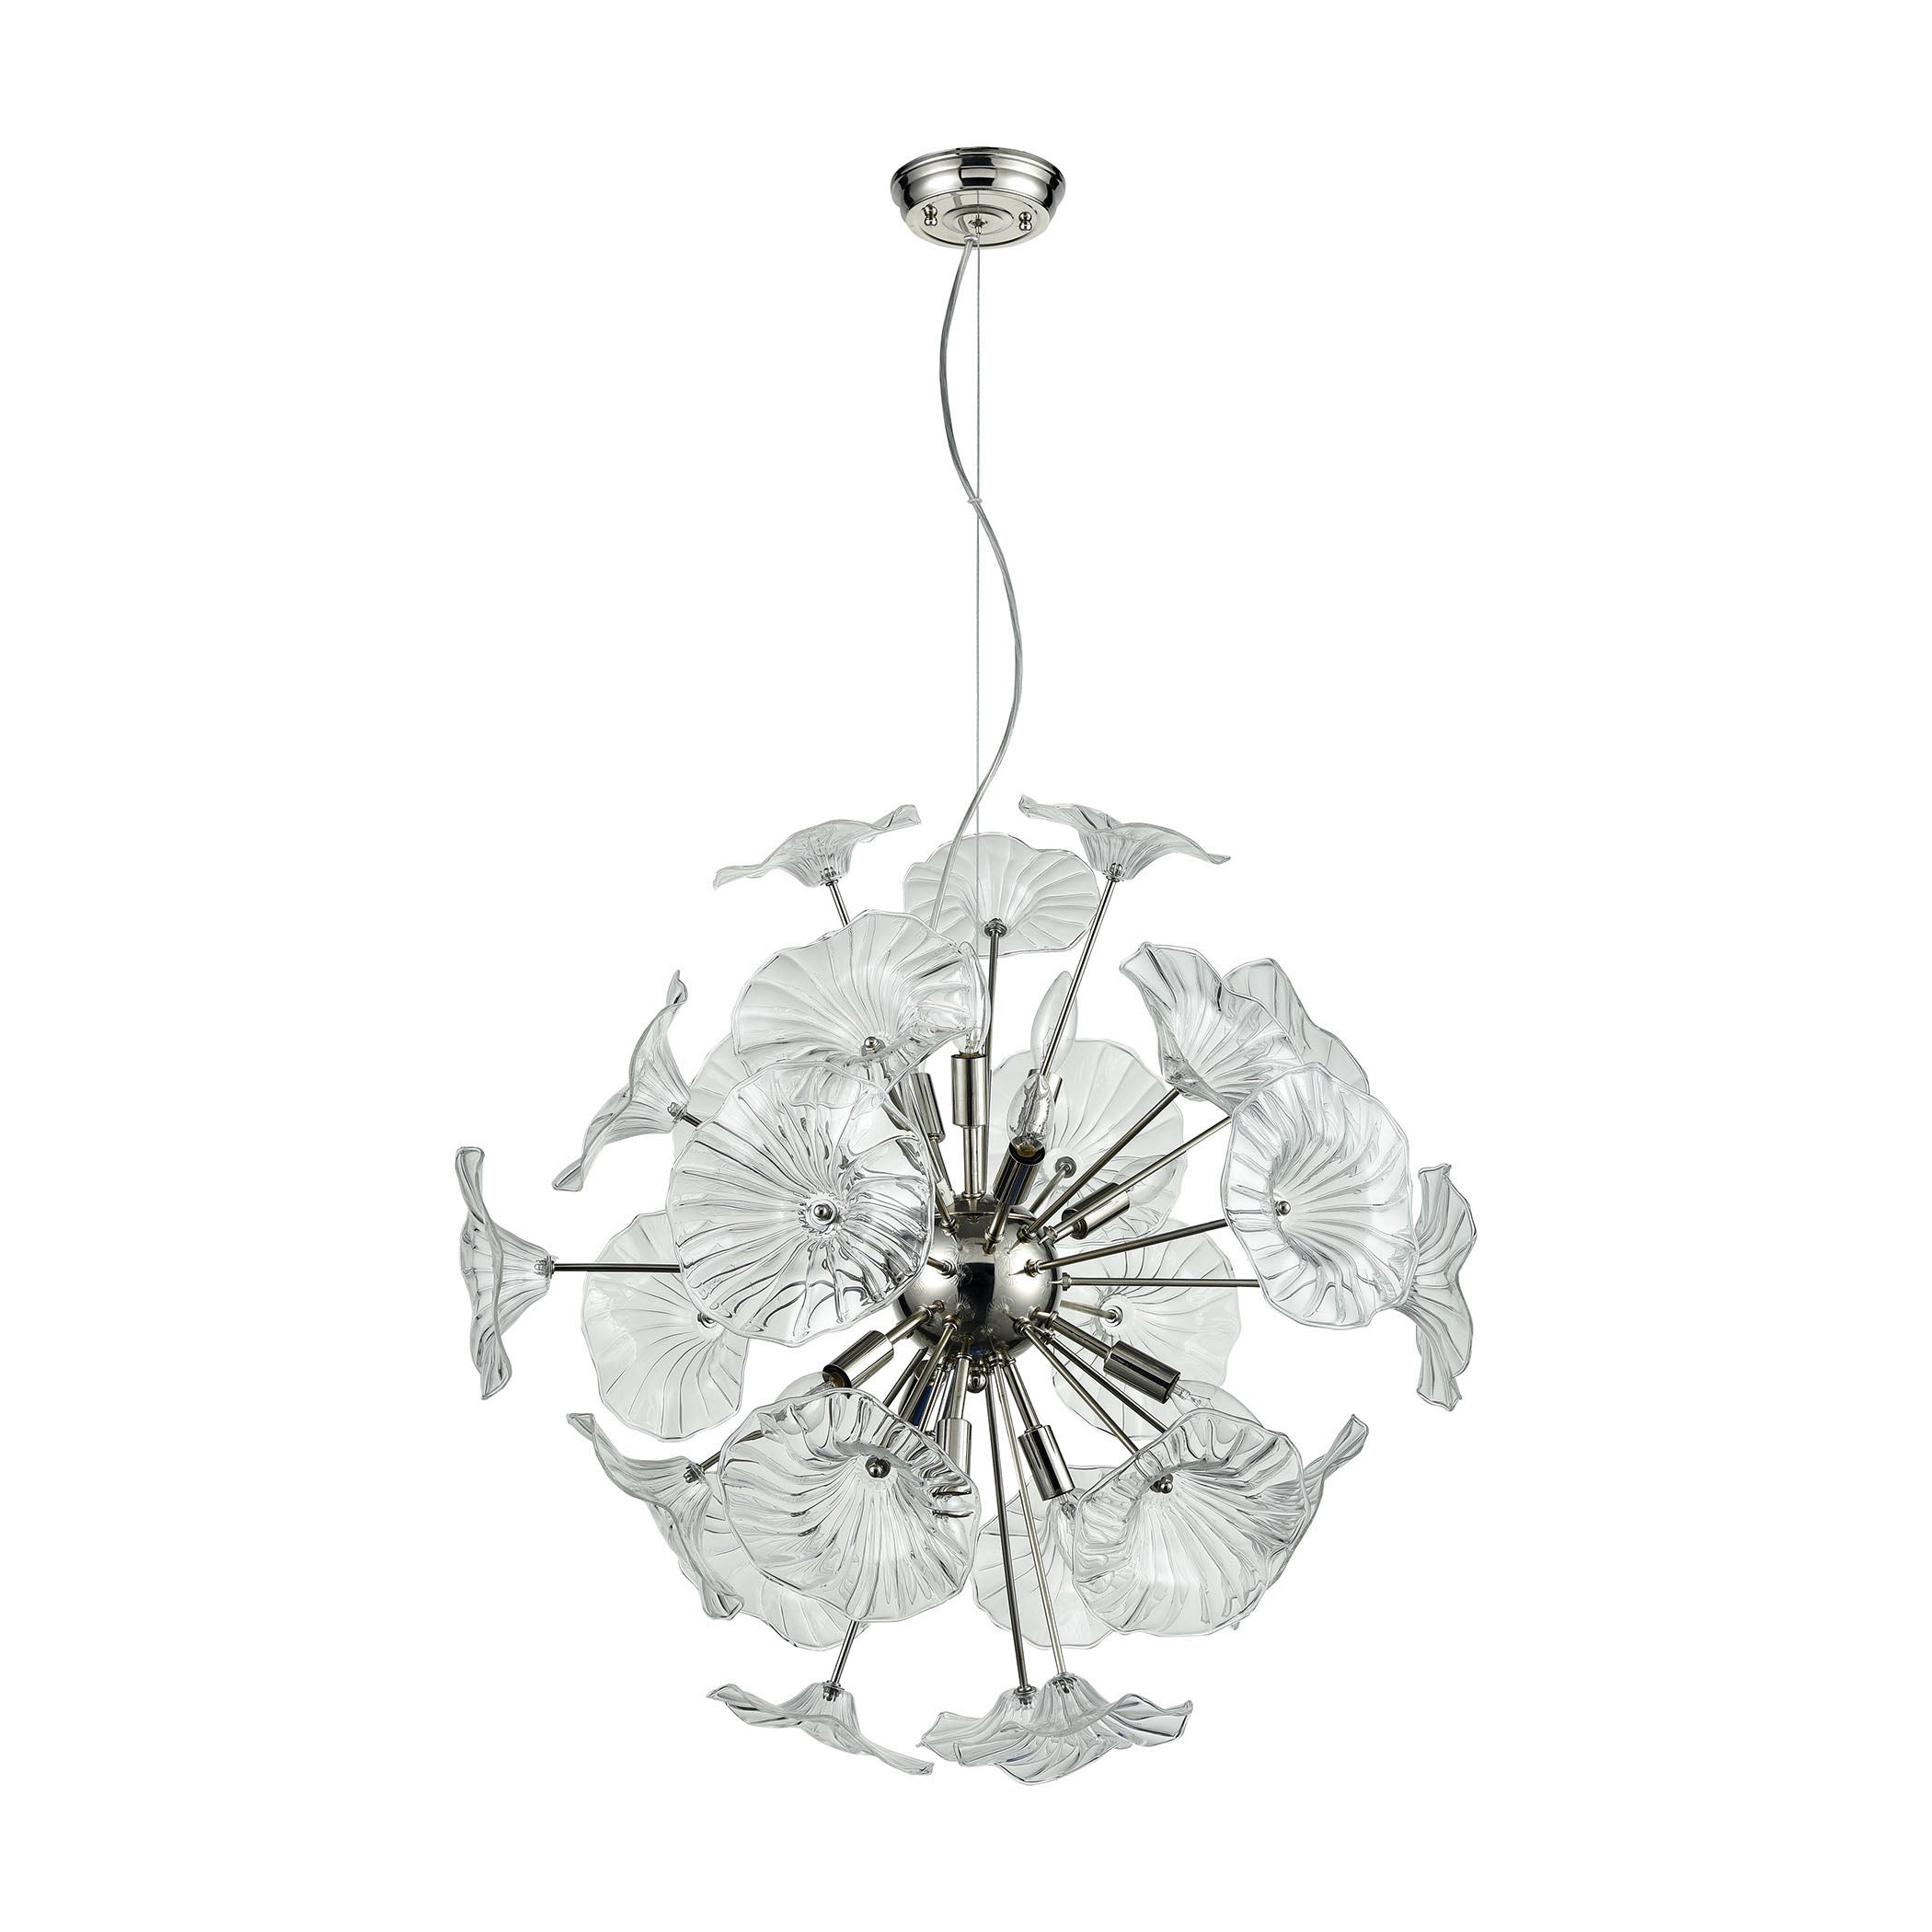 ELK Lighting 68145/12 Vershire 12-Light Chandelier in Polished Nickel with Clear Glass